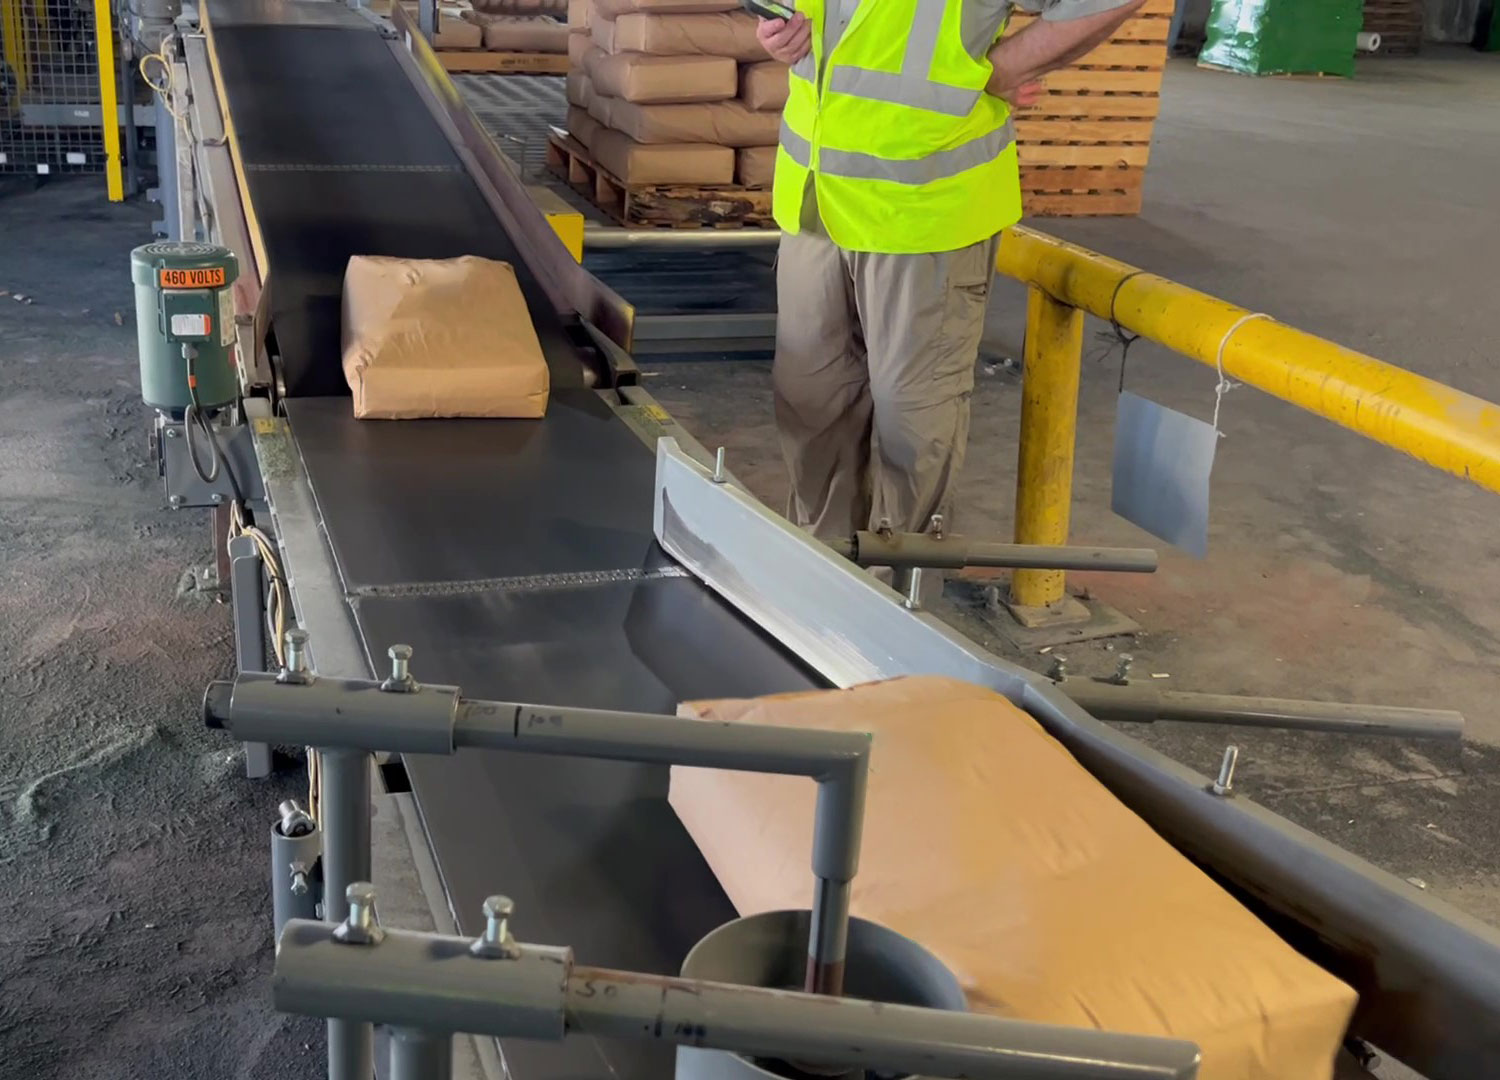 100 lb. bags of minerals moving through bag turning conveyor and up incline conveyor